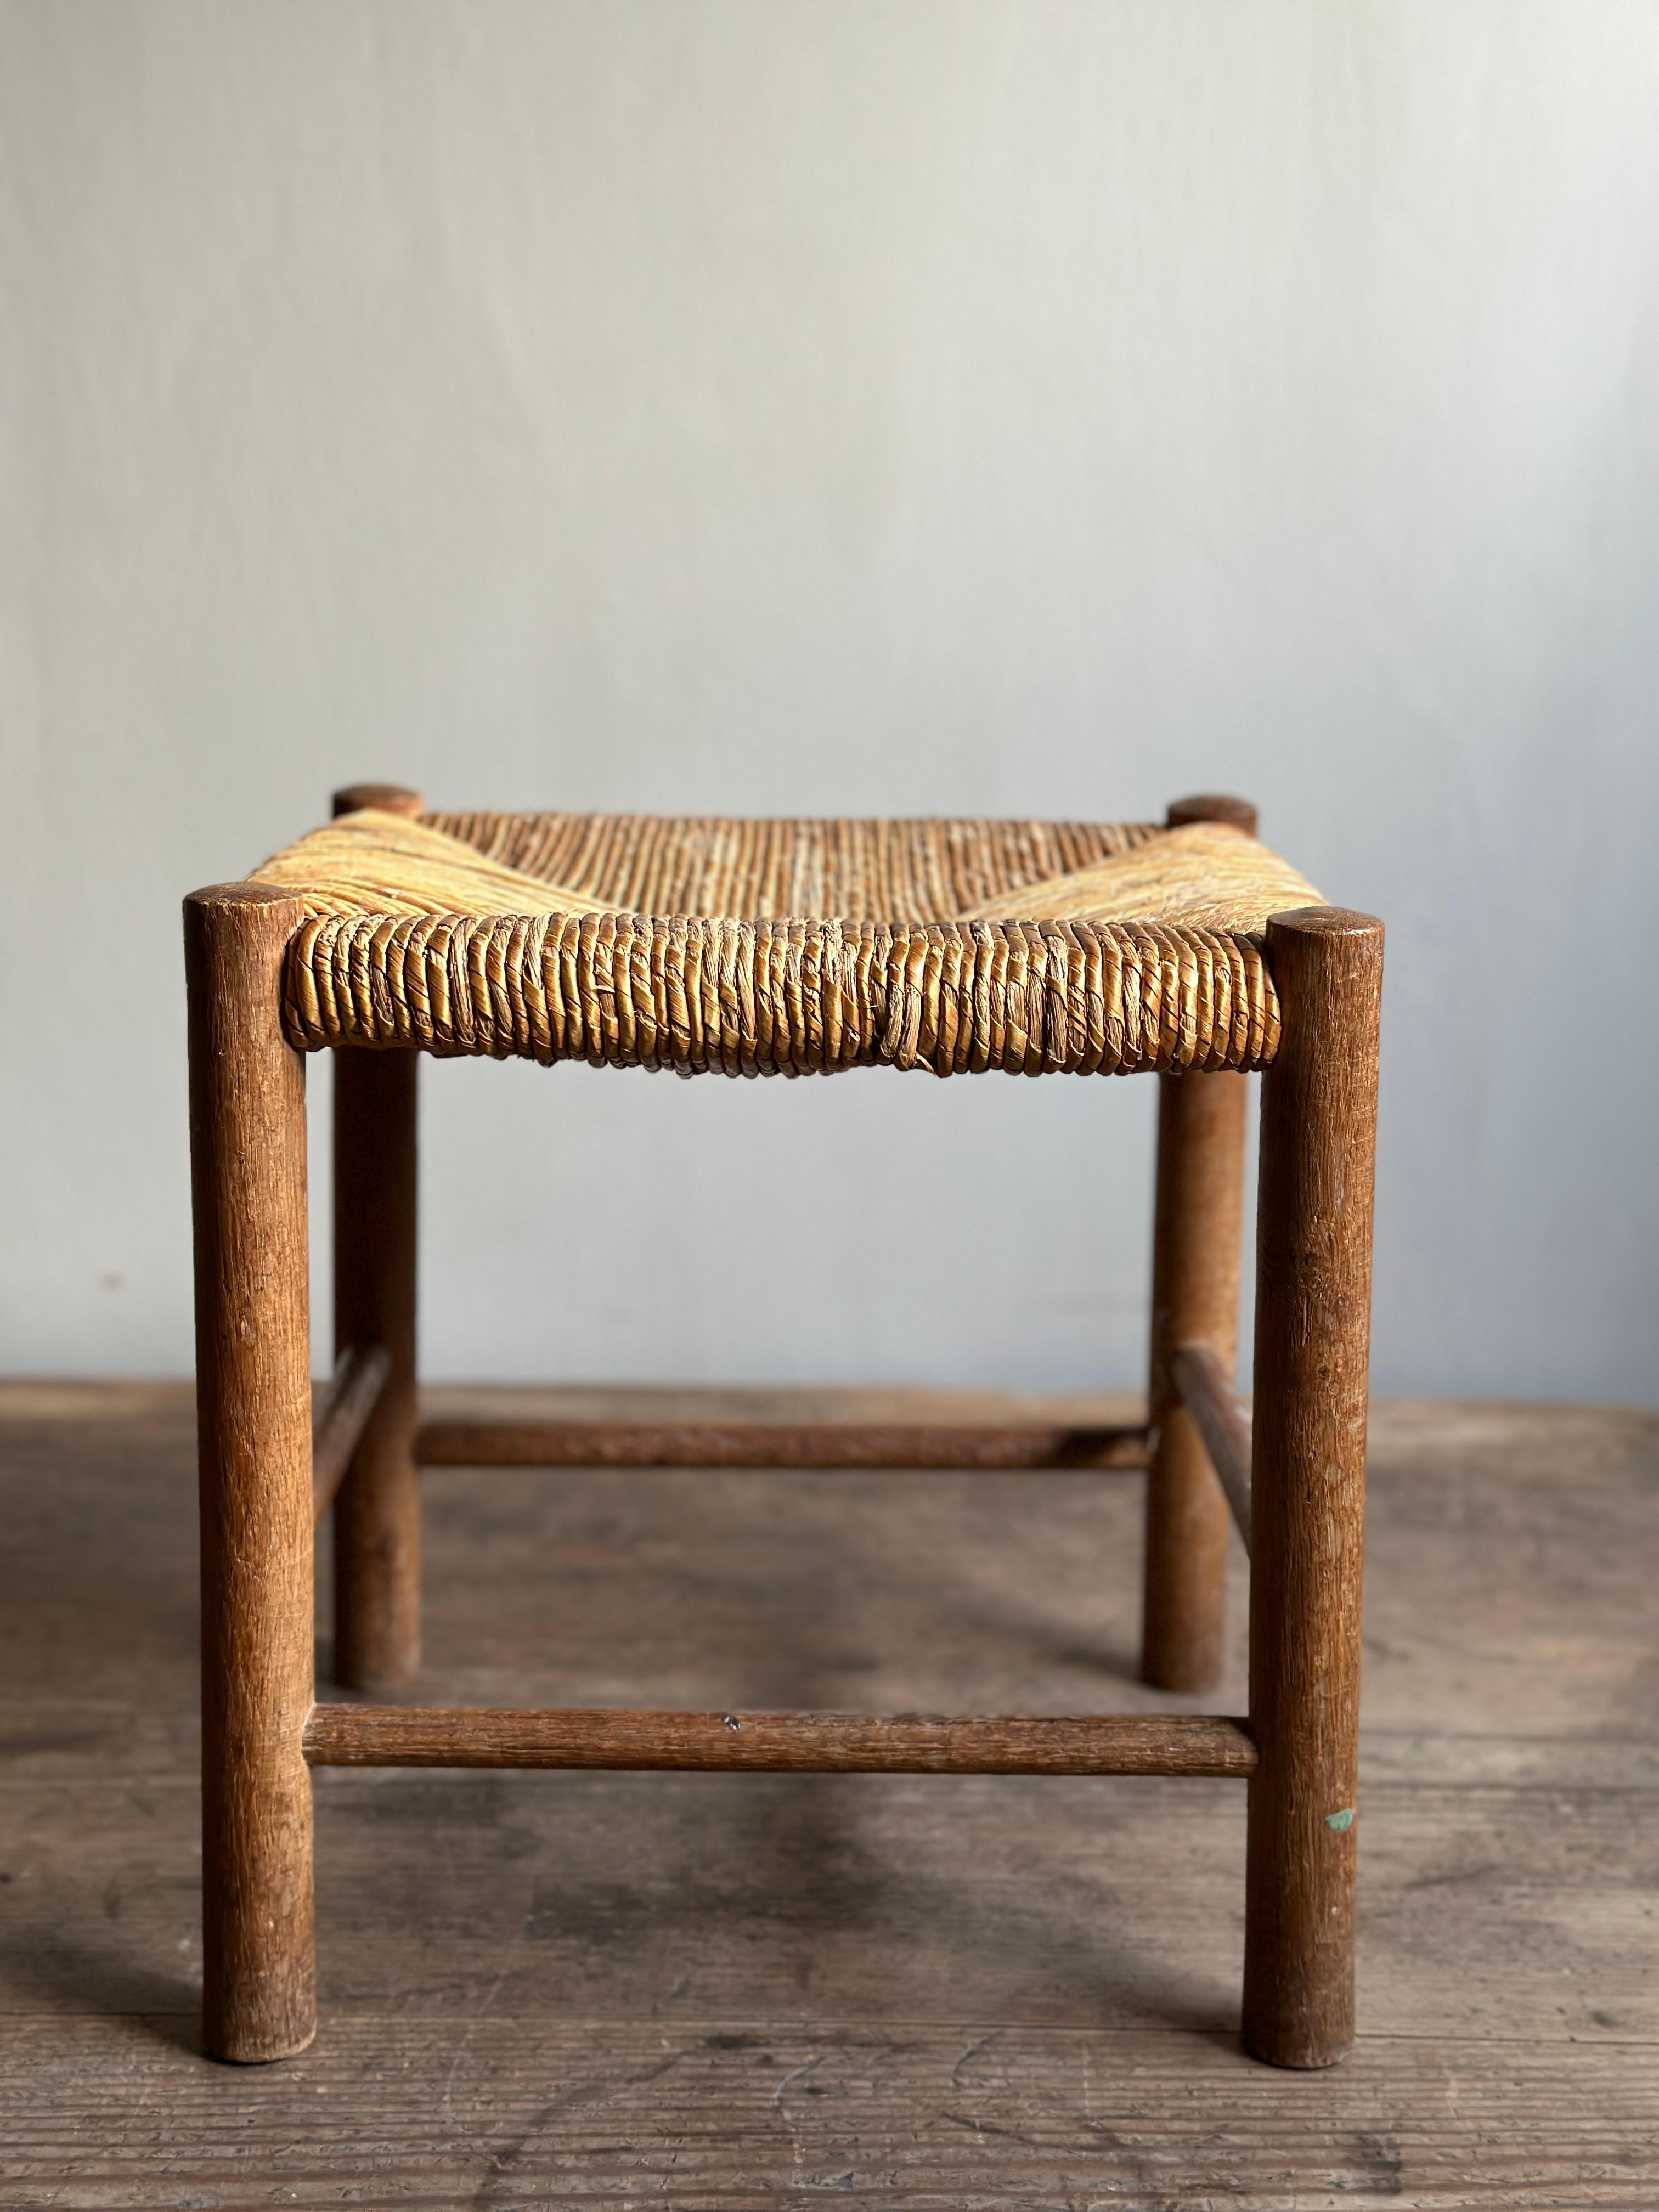 A wonderful small woven stool in the style of Charlotte Perriand, France c. 1950s.

Wear consistent with age and use. 